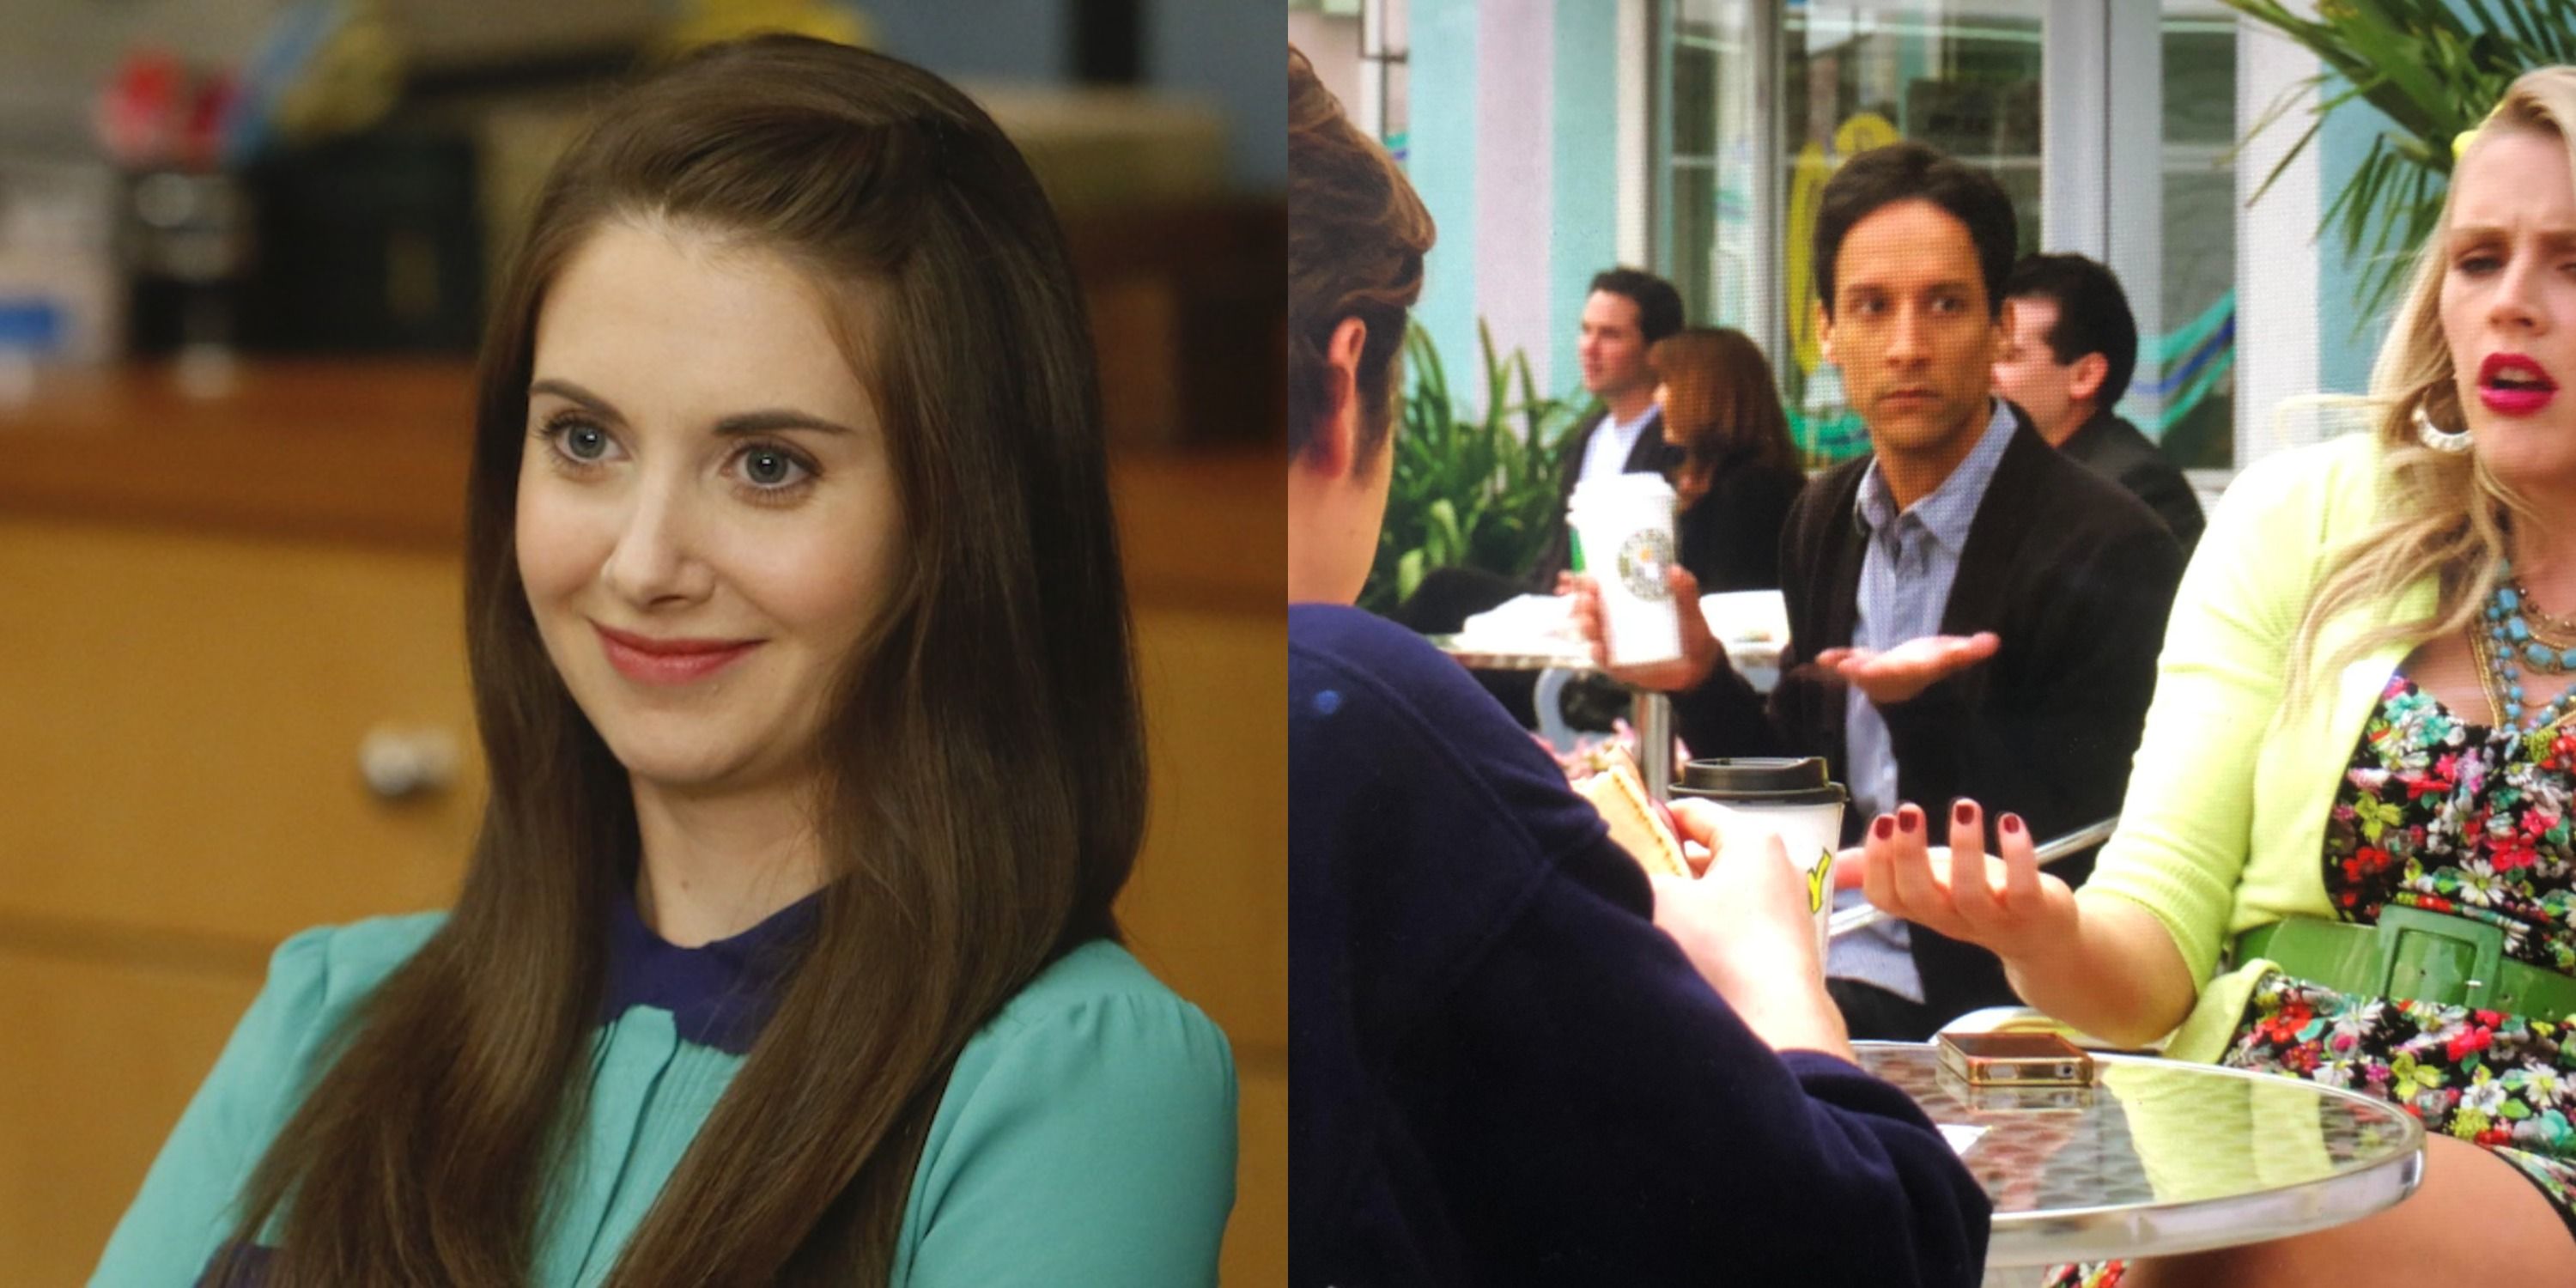 eatured Image Annie on Community and Abed on Cougar Town